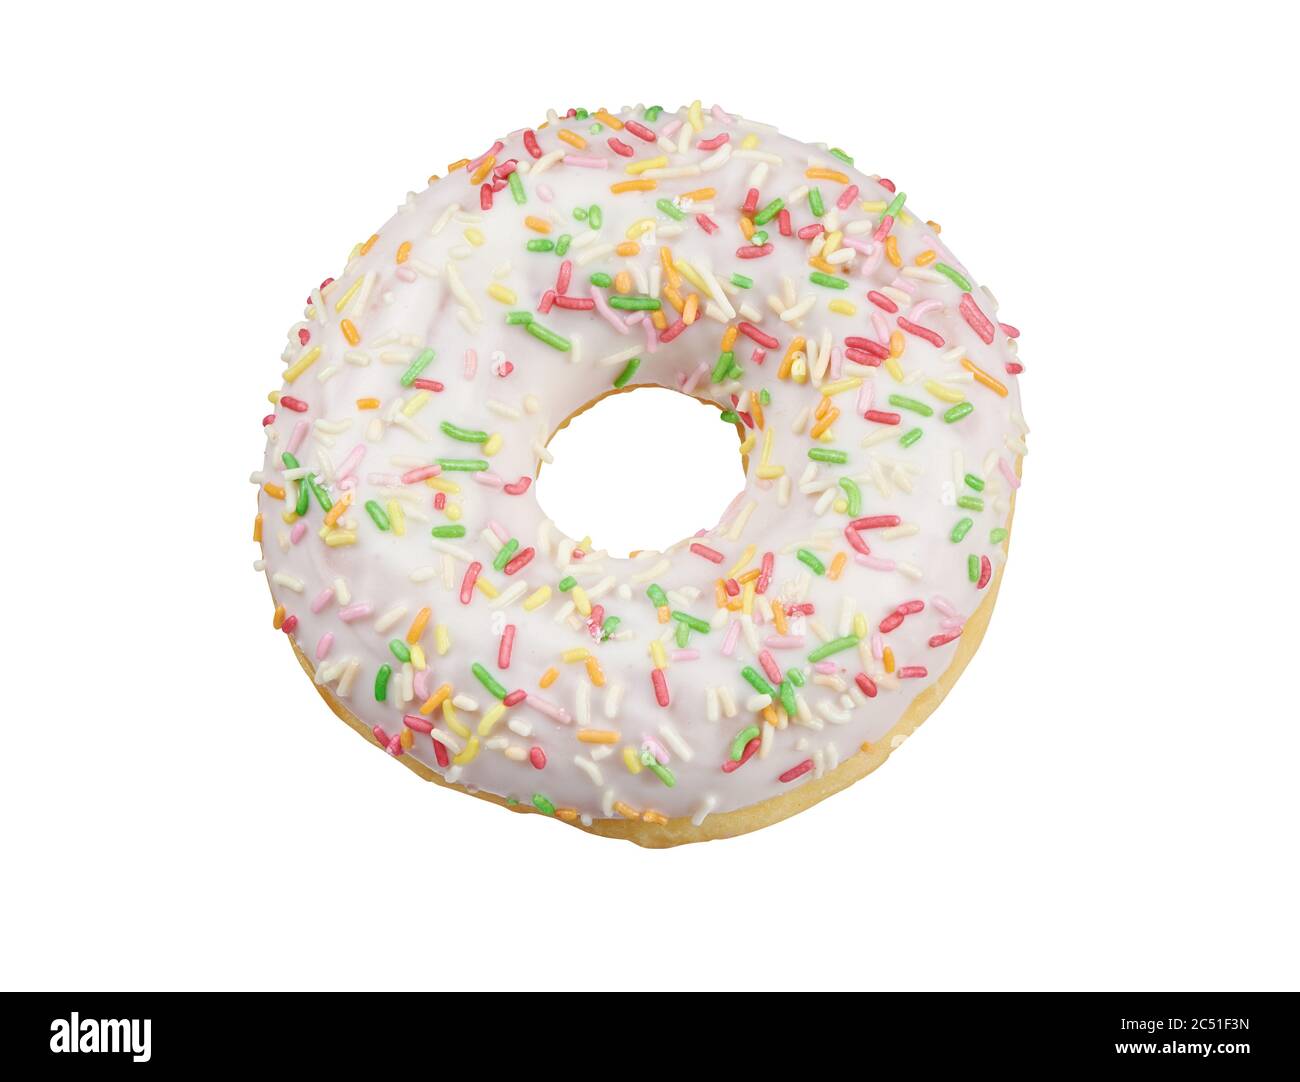 glazed round donut with sprinkles isolated on white background. Top view Stock Photo